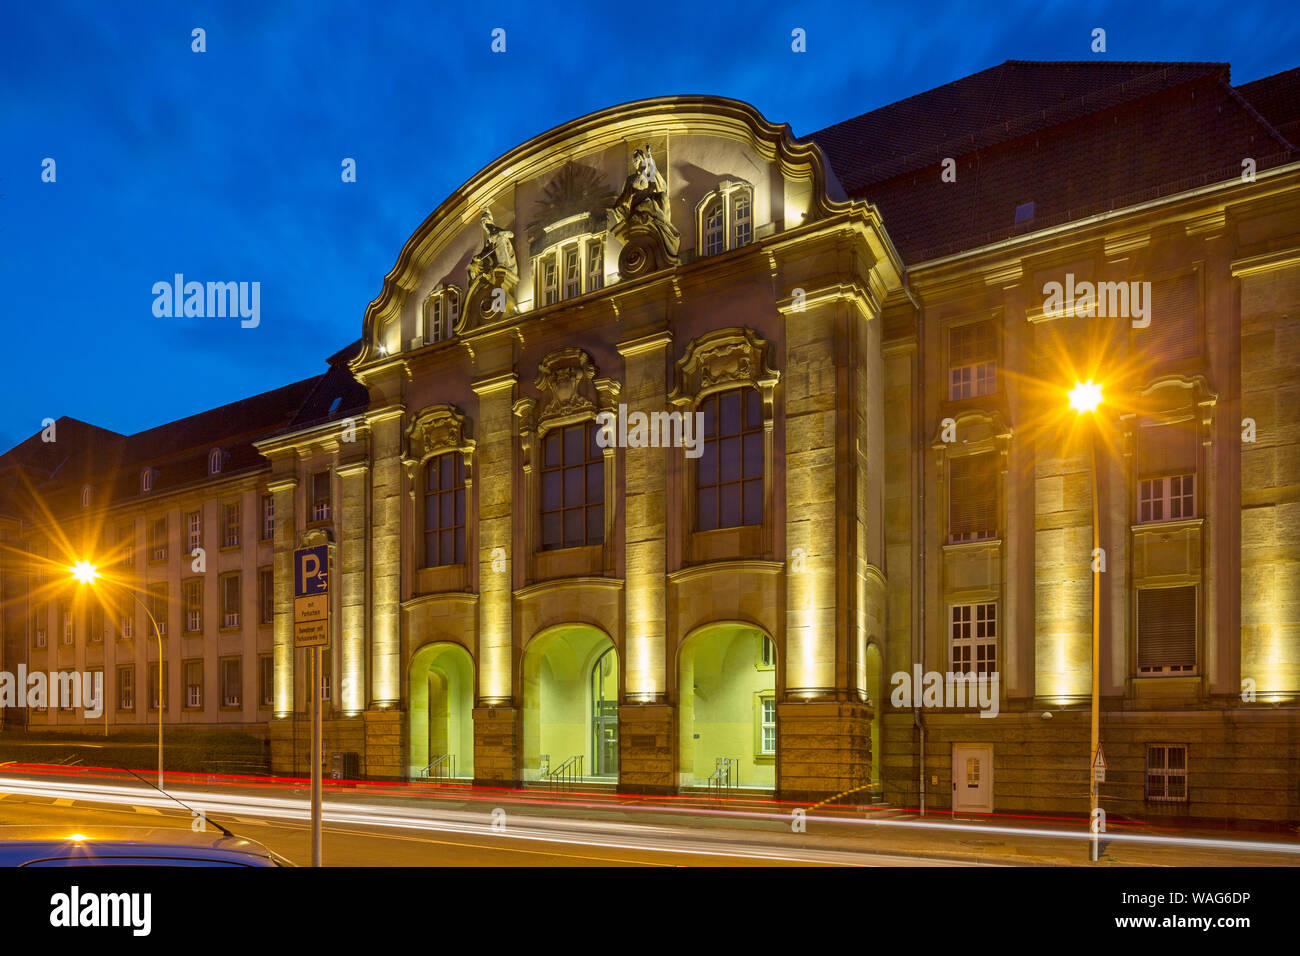 Evening, evening admission, dusk, evening light, evening mood, district court, architecture, outside view, field recording, building, lighting, blue h Stock Photo